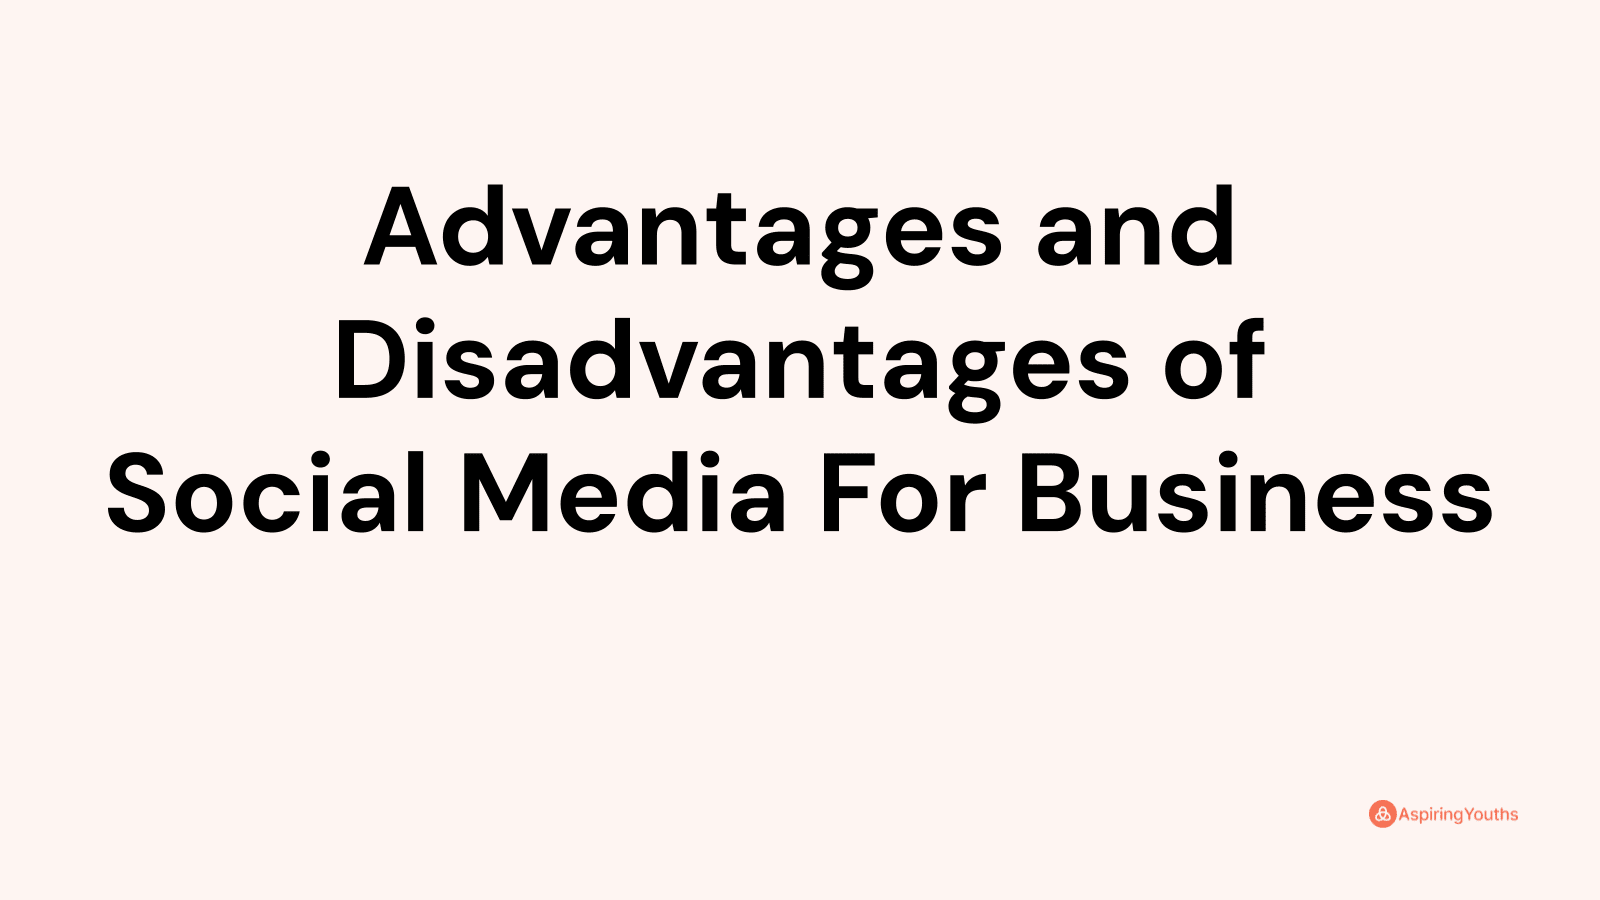 Advantages and disadvantages of Social Media For Business